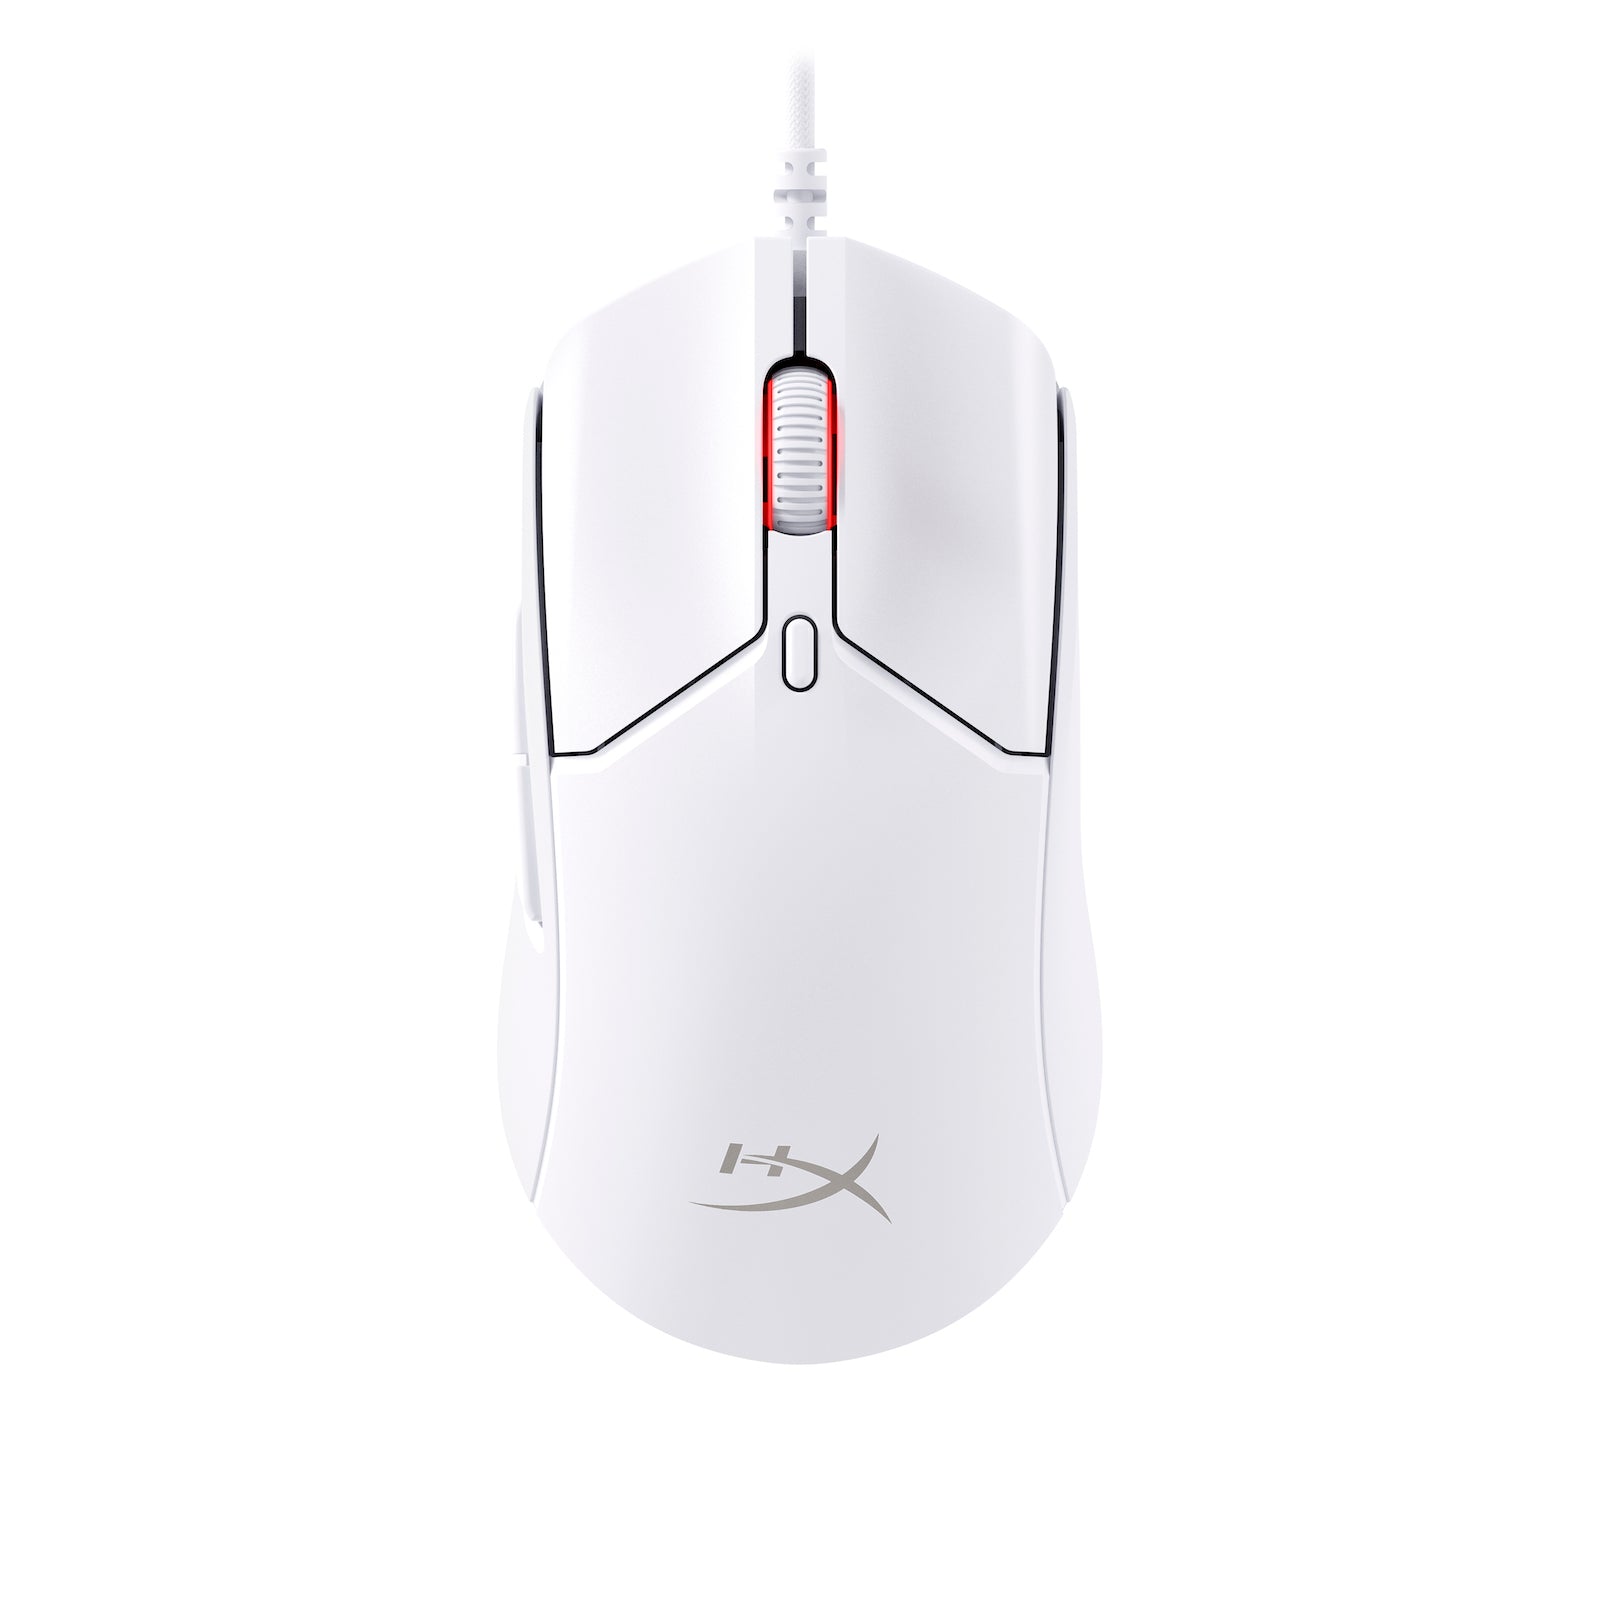 HyperX Pulsefire Haste 2 Wireless Gaming Mouse Review